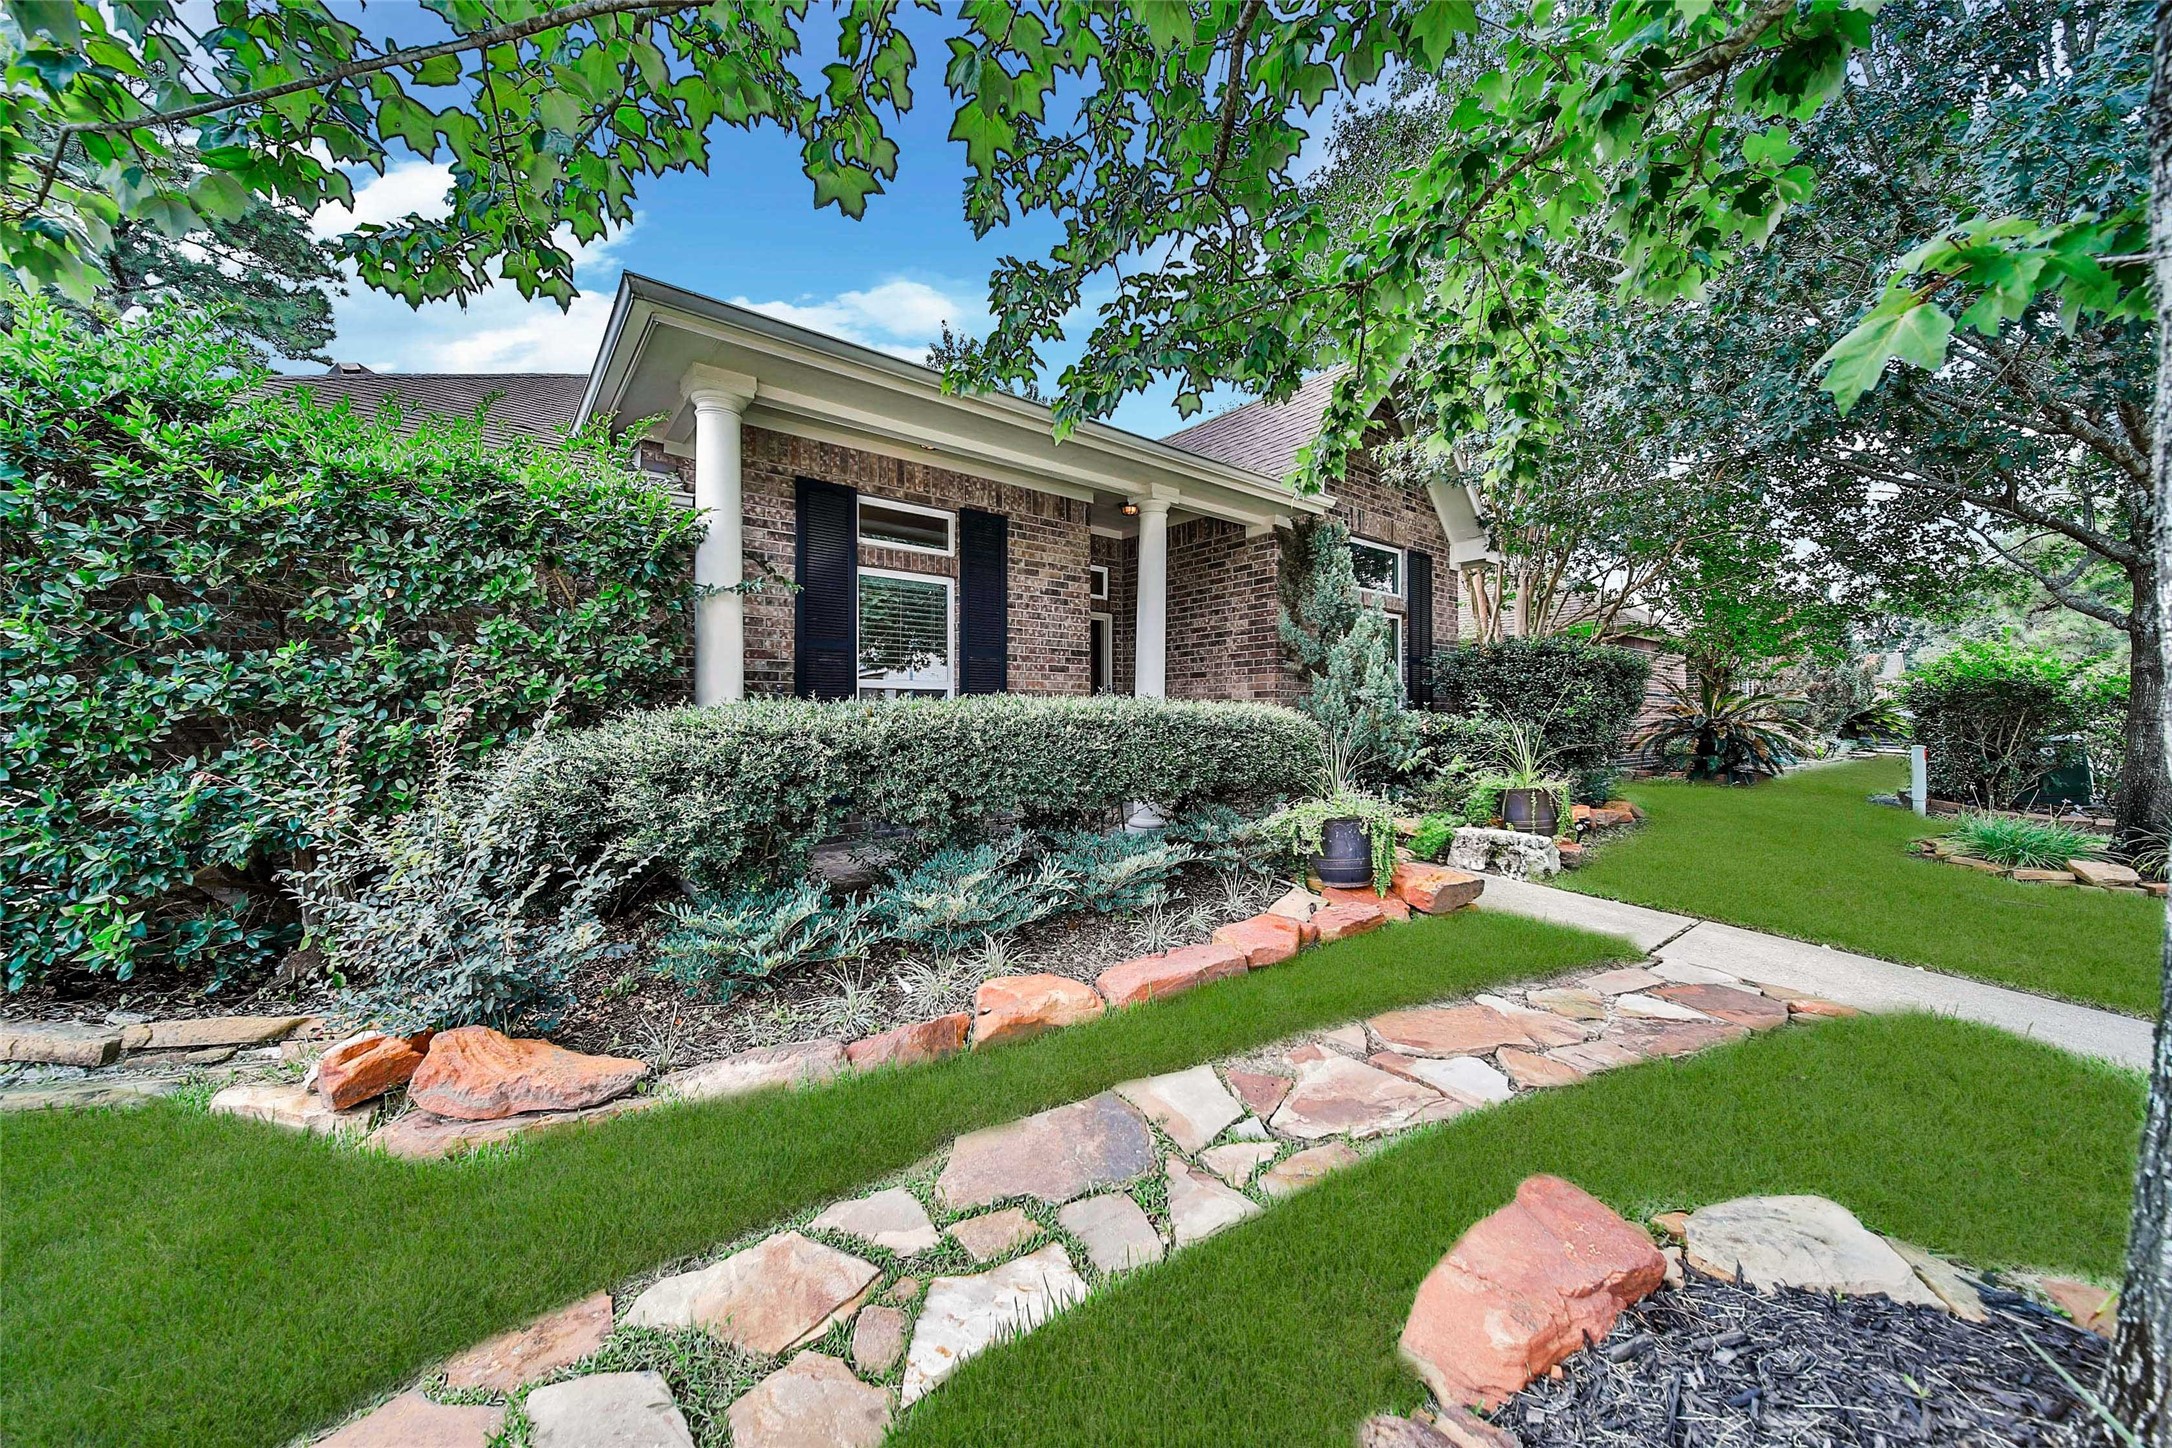 Superb curb appeal with cozy covered patio